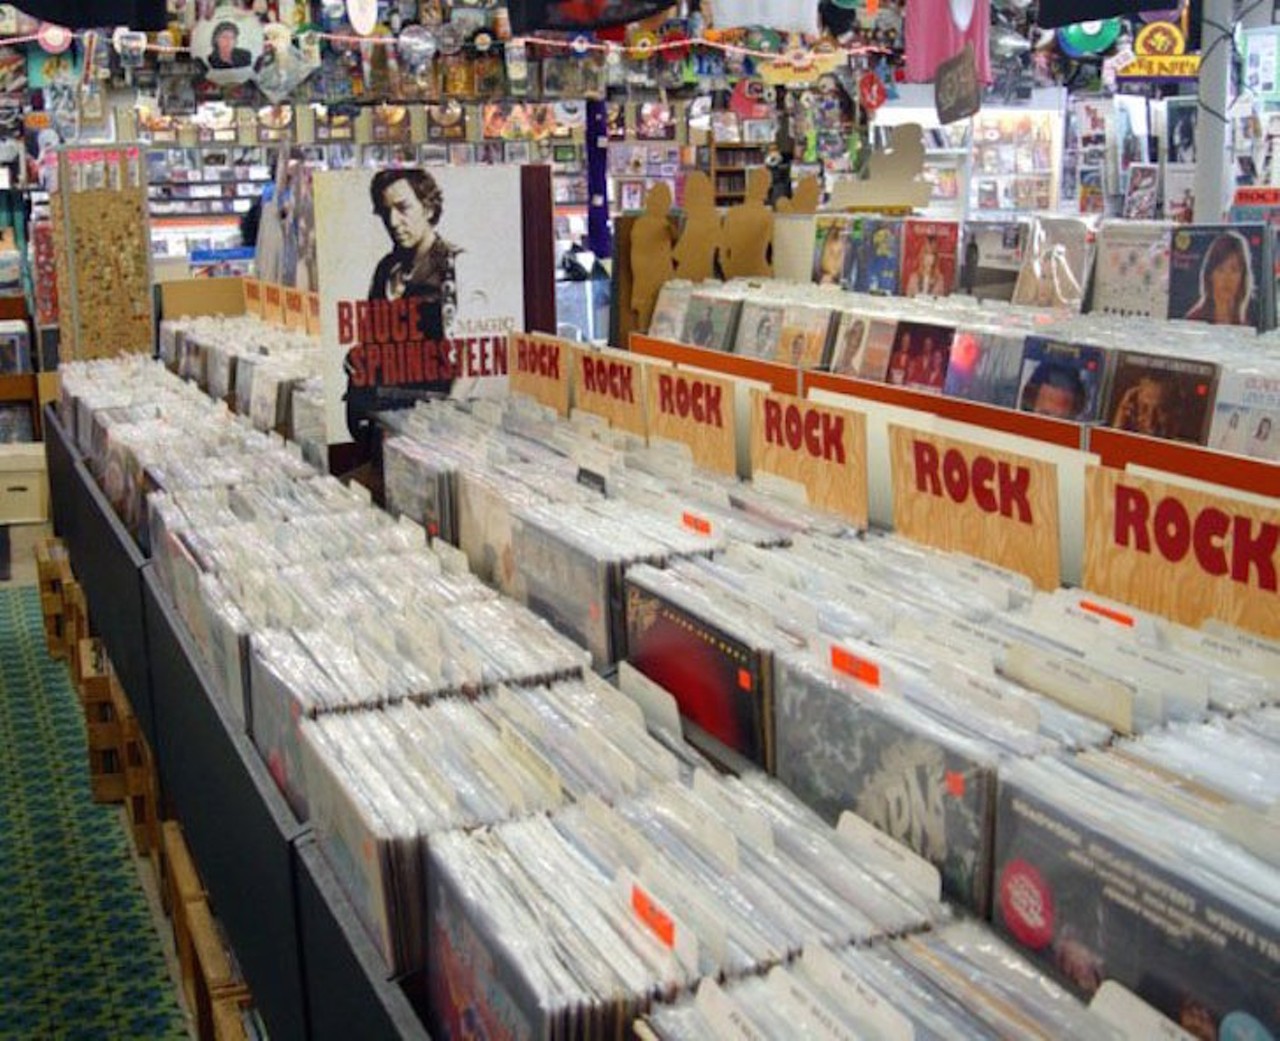 Rock &#145;n Roll Heaven
1814 N. Orange Ave. | 407-896-1952
Rock &#145;n Roll Heaven is the place for music lovers of all genres to buy and sell records. They also sell vintage posters, toys and memorabilia, but don't ask about the Three Stooges marionettes - legend has it Michael Jackson once tried to buy them and was denied by the owners.
Photo via Rock -n- Roll Heaven/Facebook